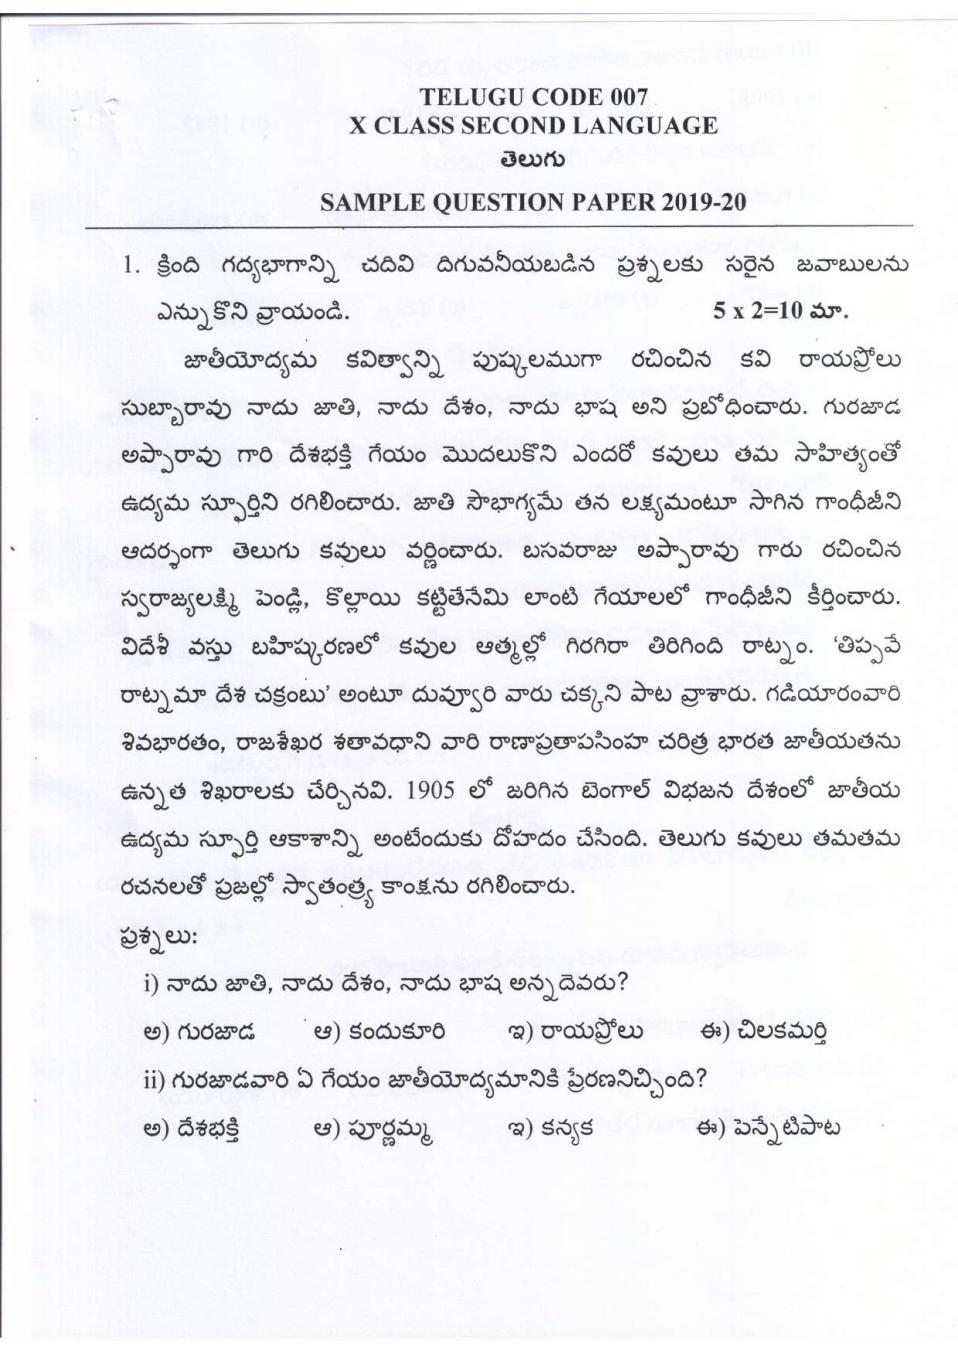 CBSE Class 10 Sample Paper 2020 for Telugu AP - Page 1